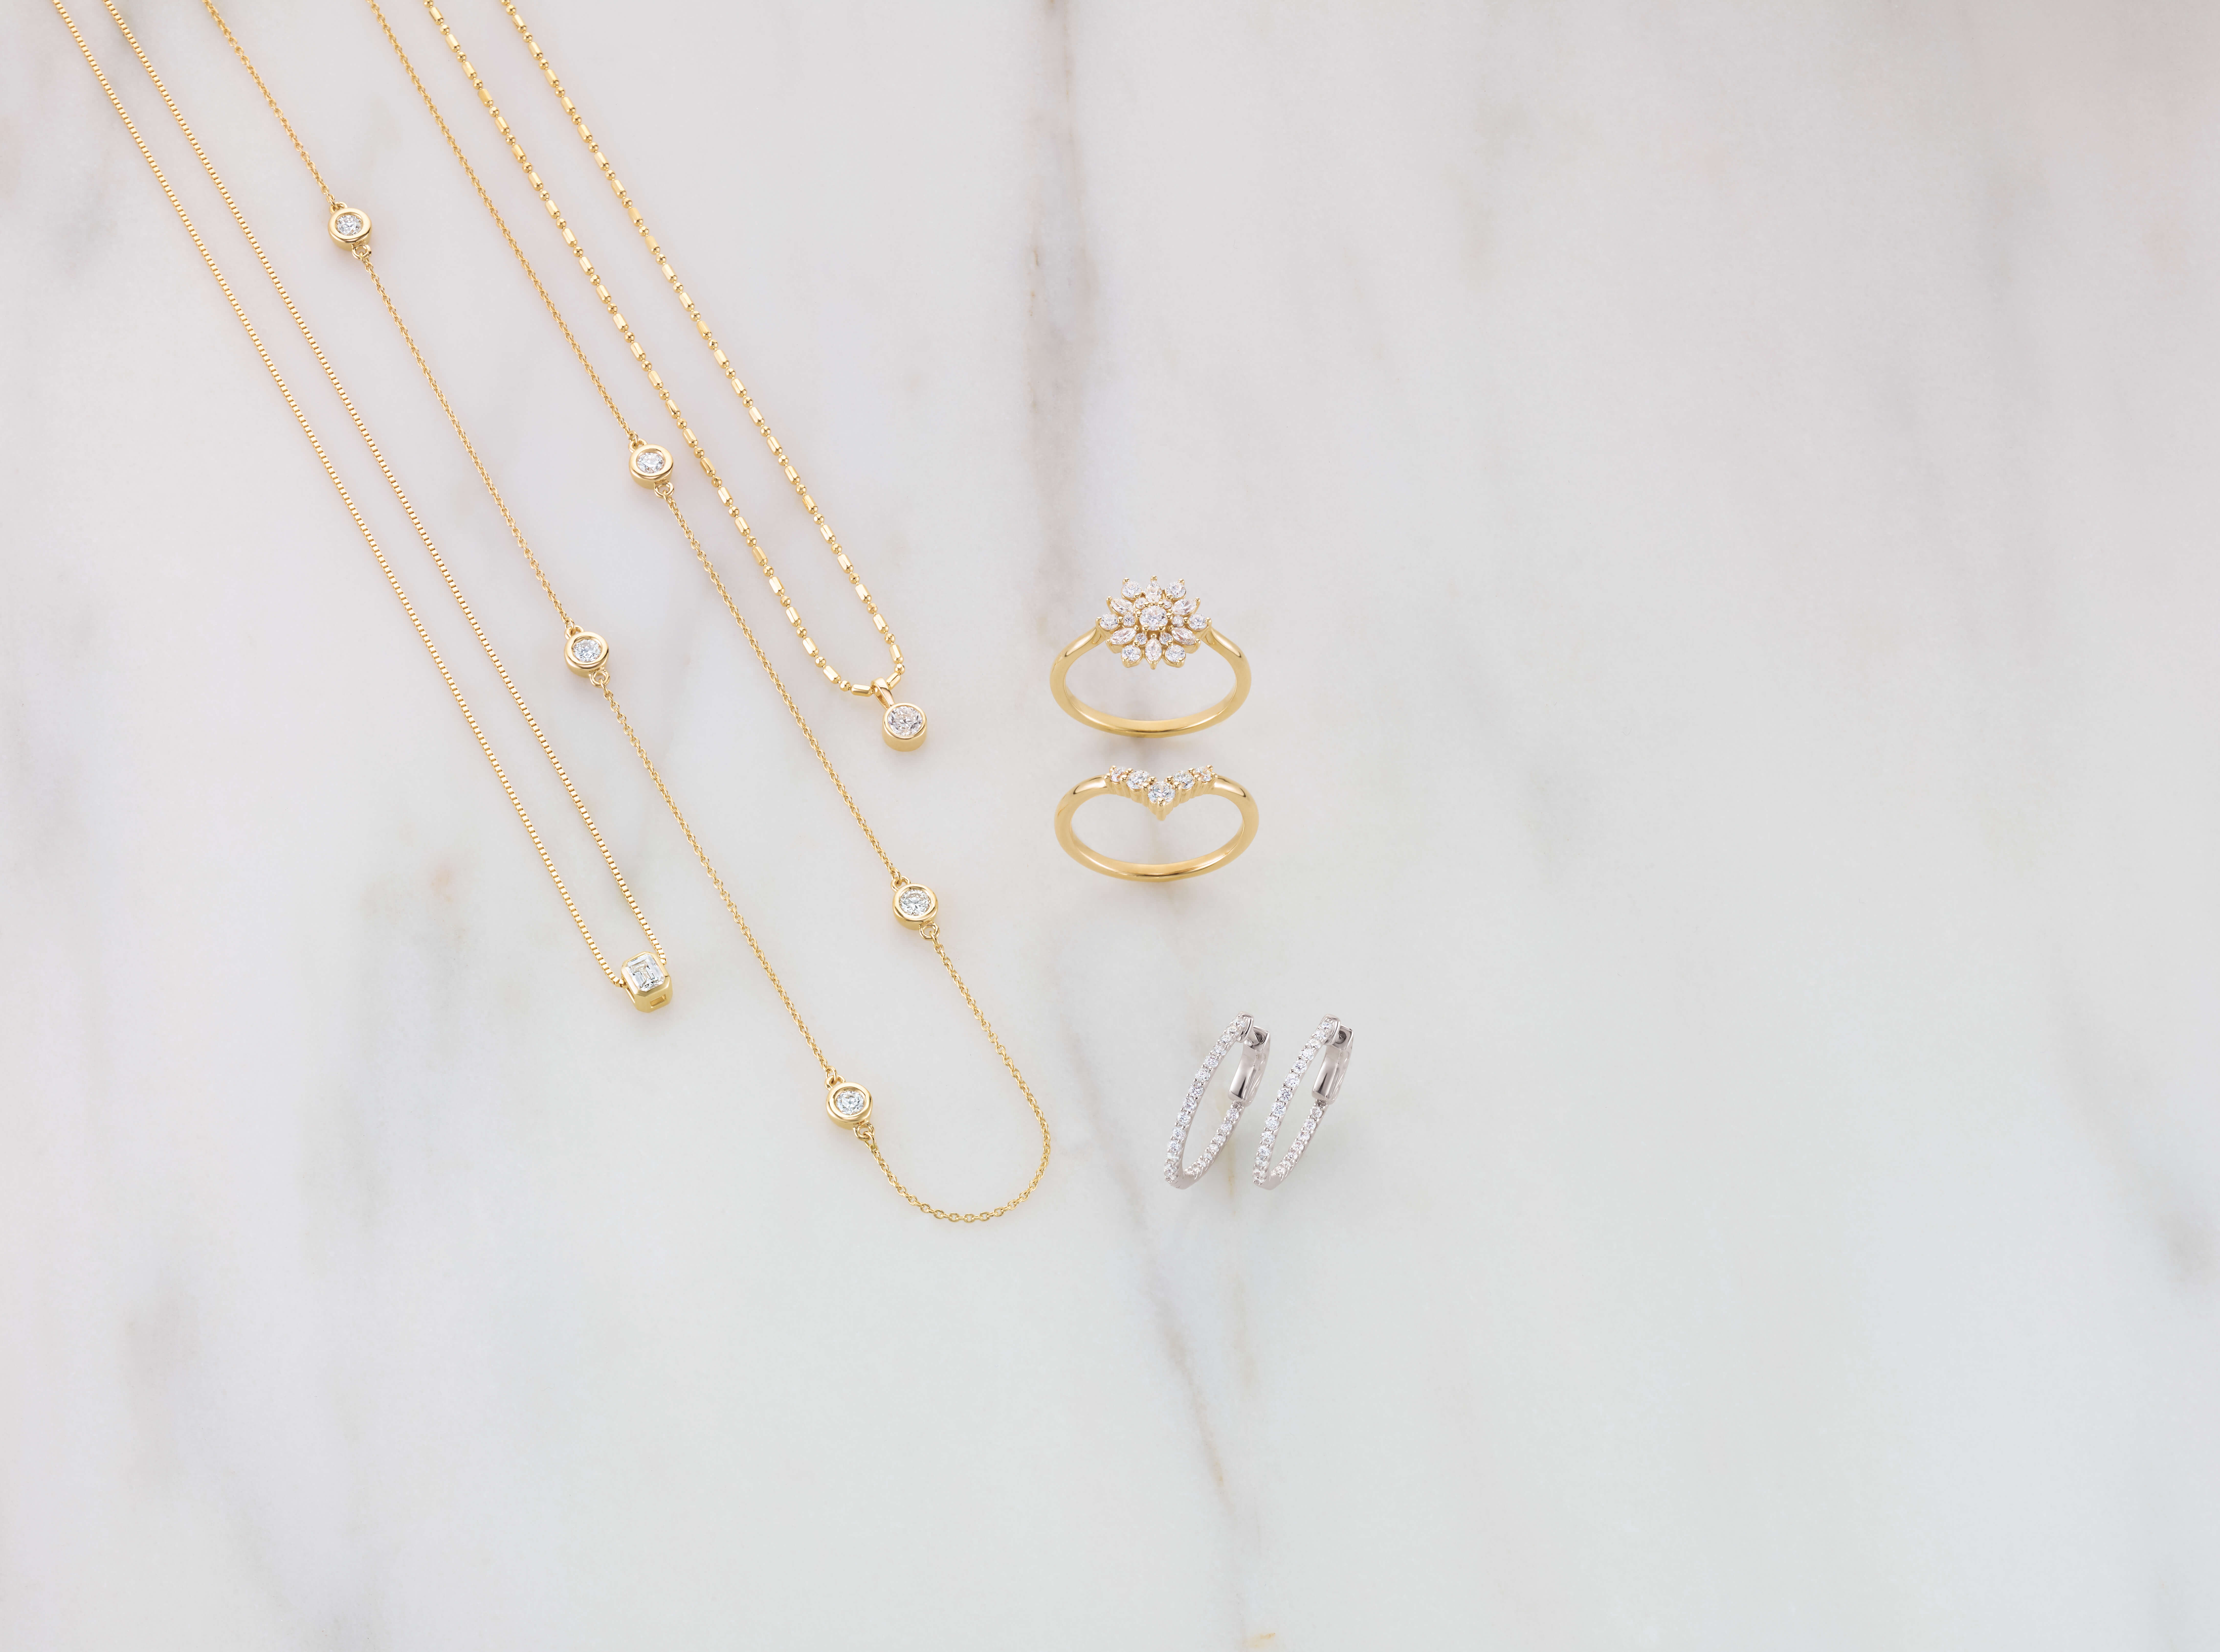 White marble counter with 3 gold chain necklaces, 2 gold diamond rings, and other diamond jewellery